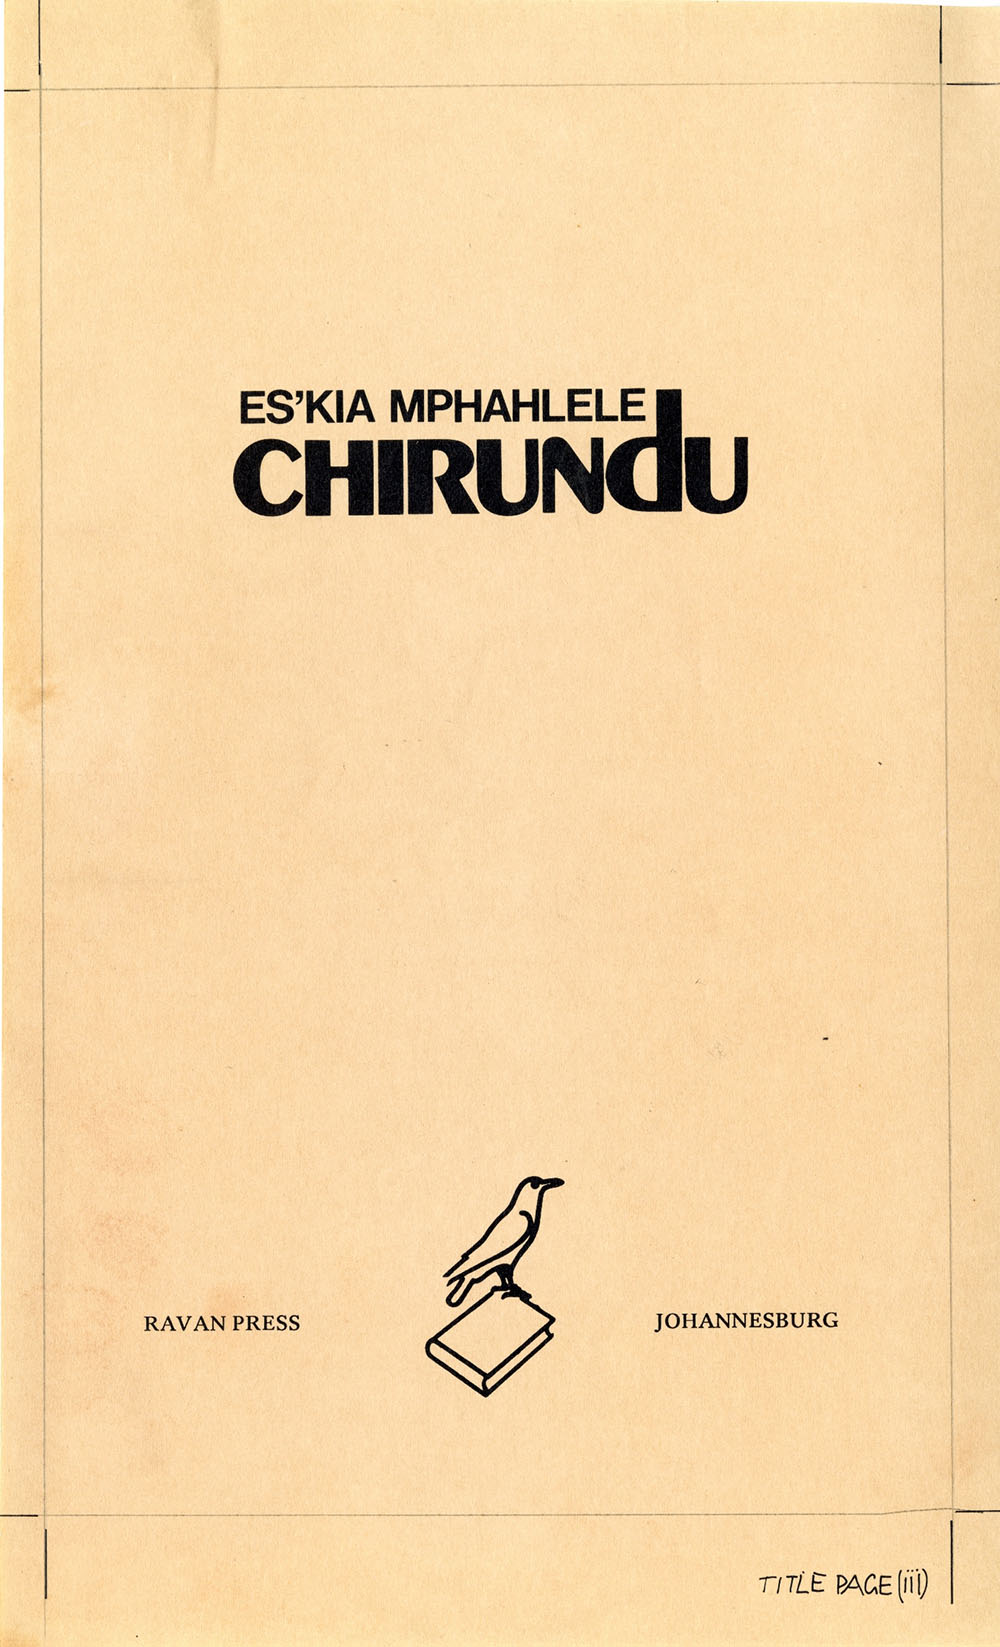 Notes and proofs for the cover artwork of <em>Chirundu</em>, in preparation for its publication by Ravan Press in 1979.